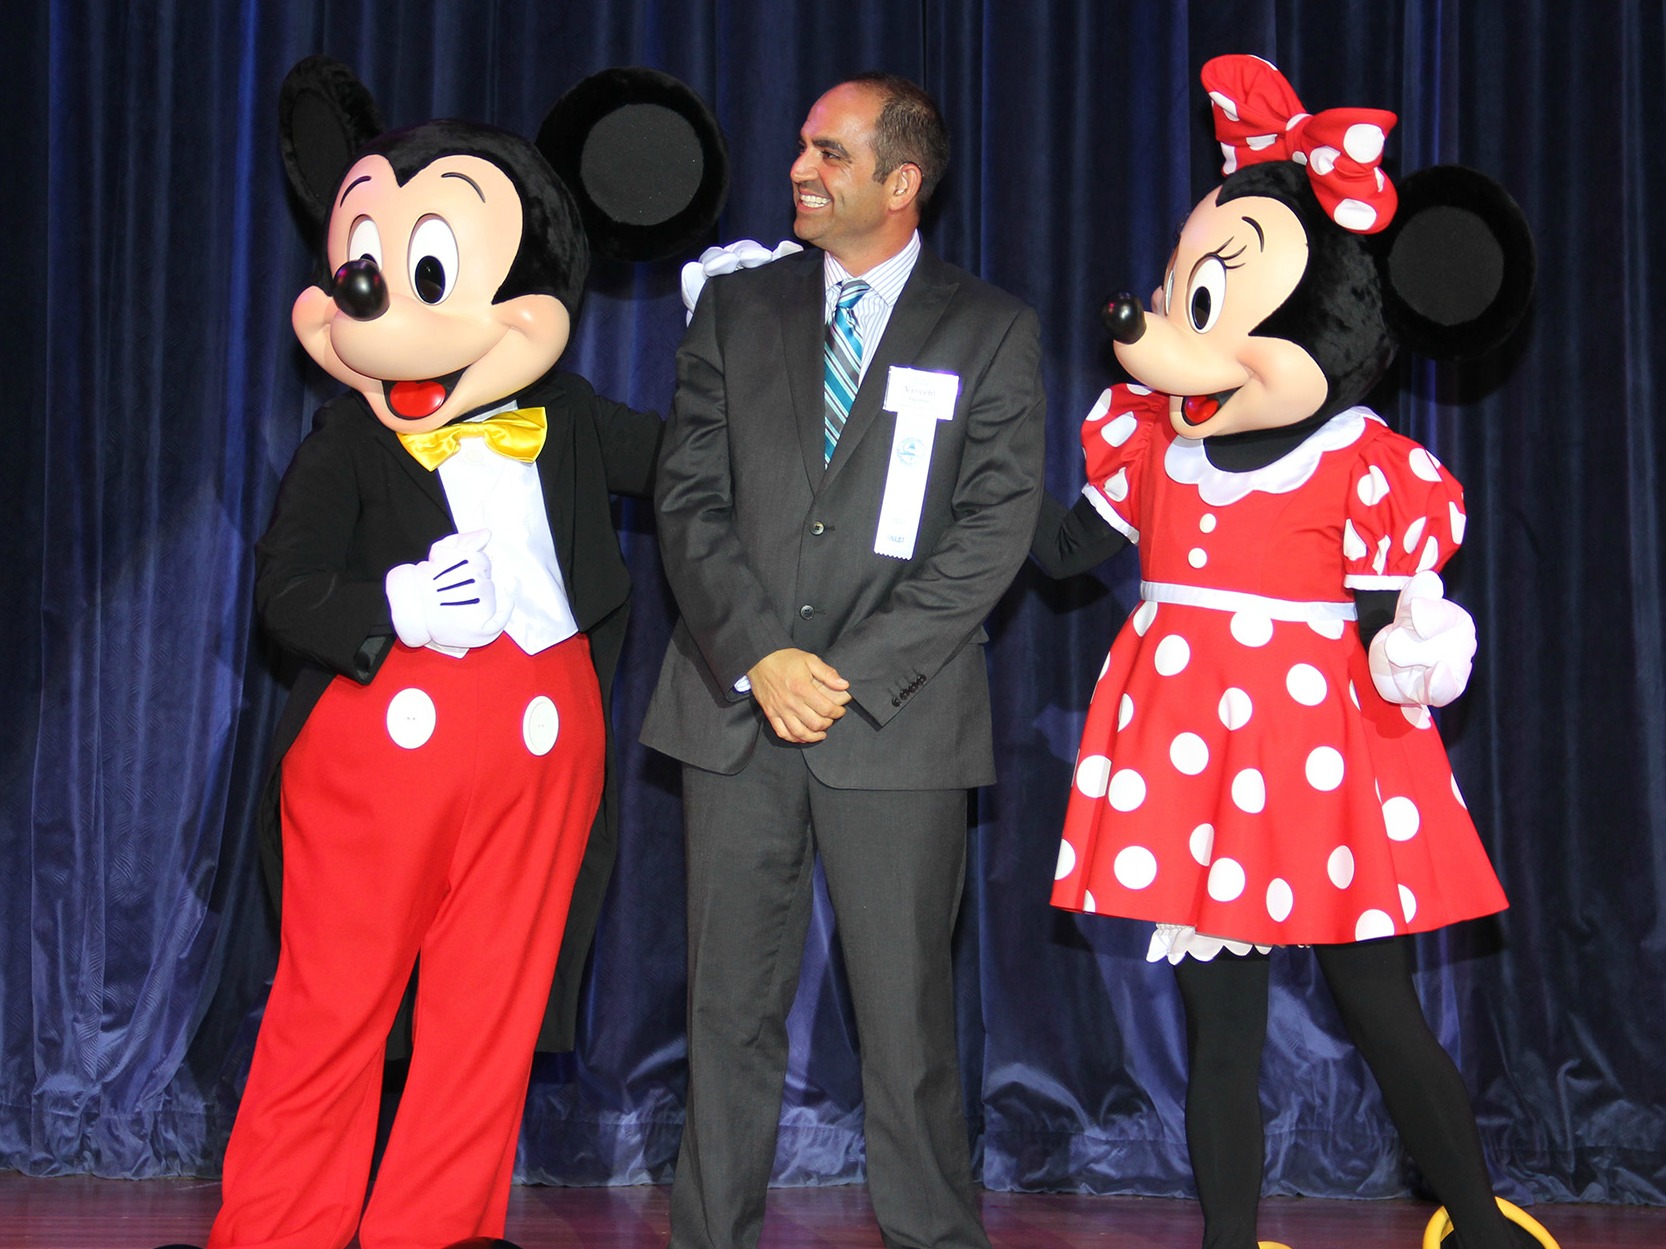 Vincent Saporito stands with Mickey and Minnie Mouse